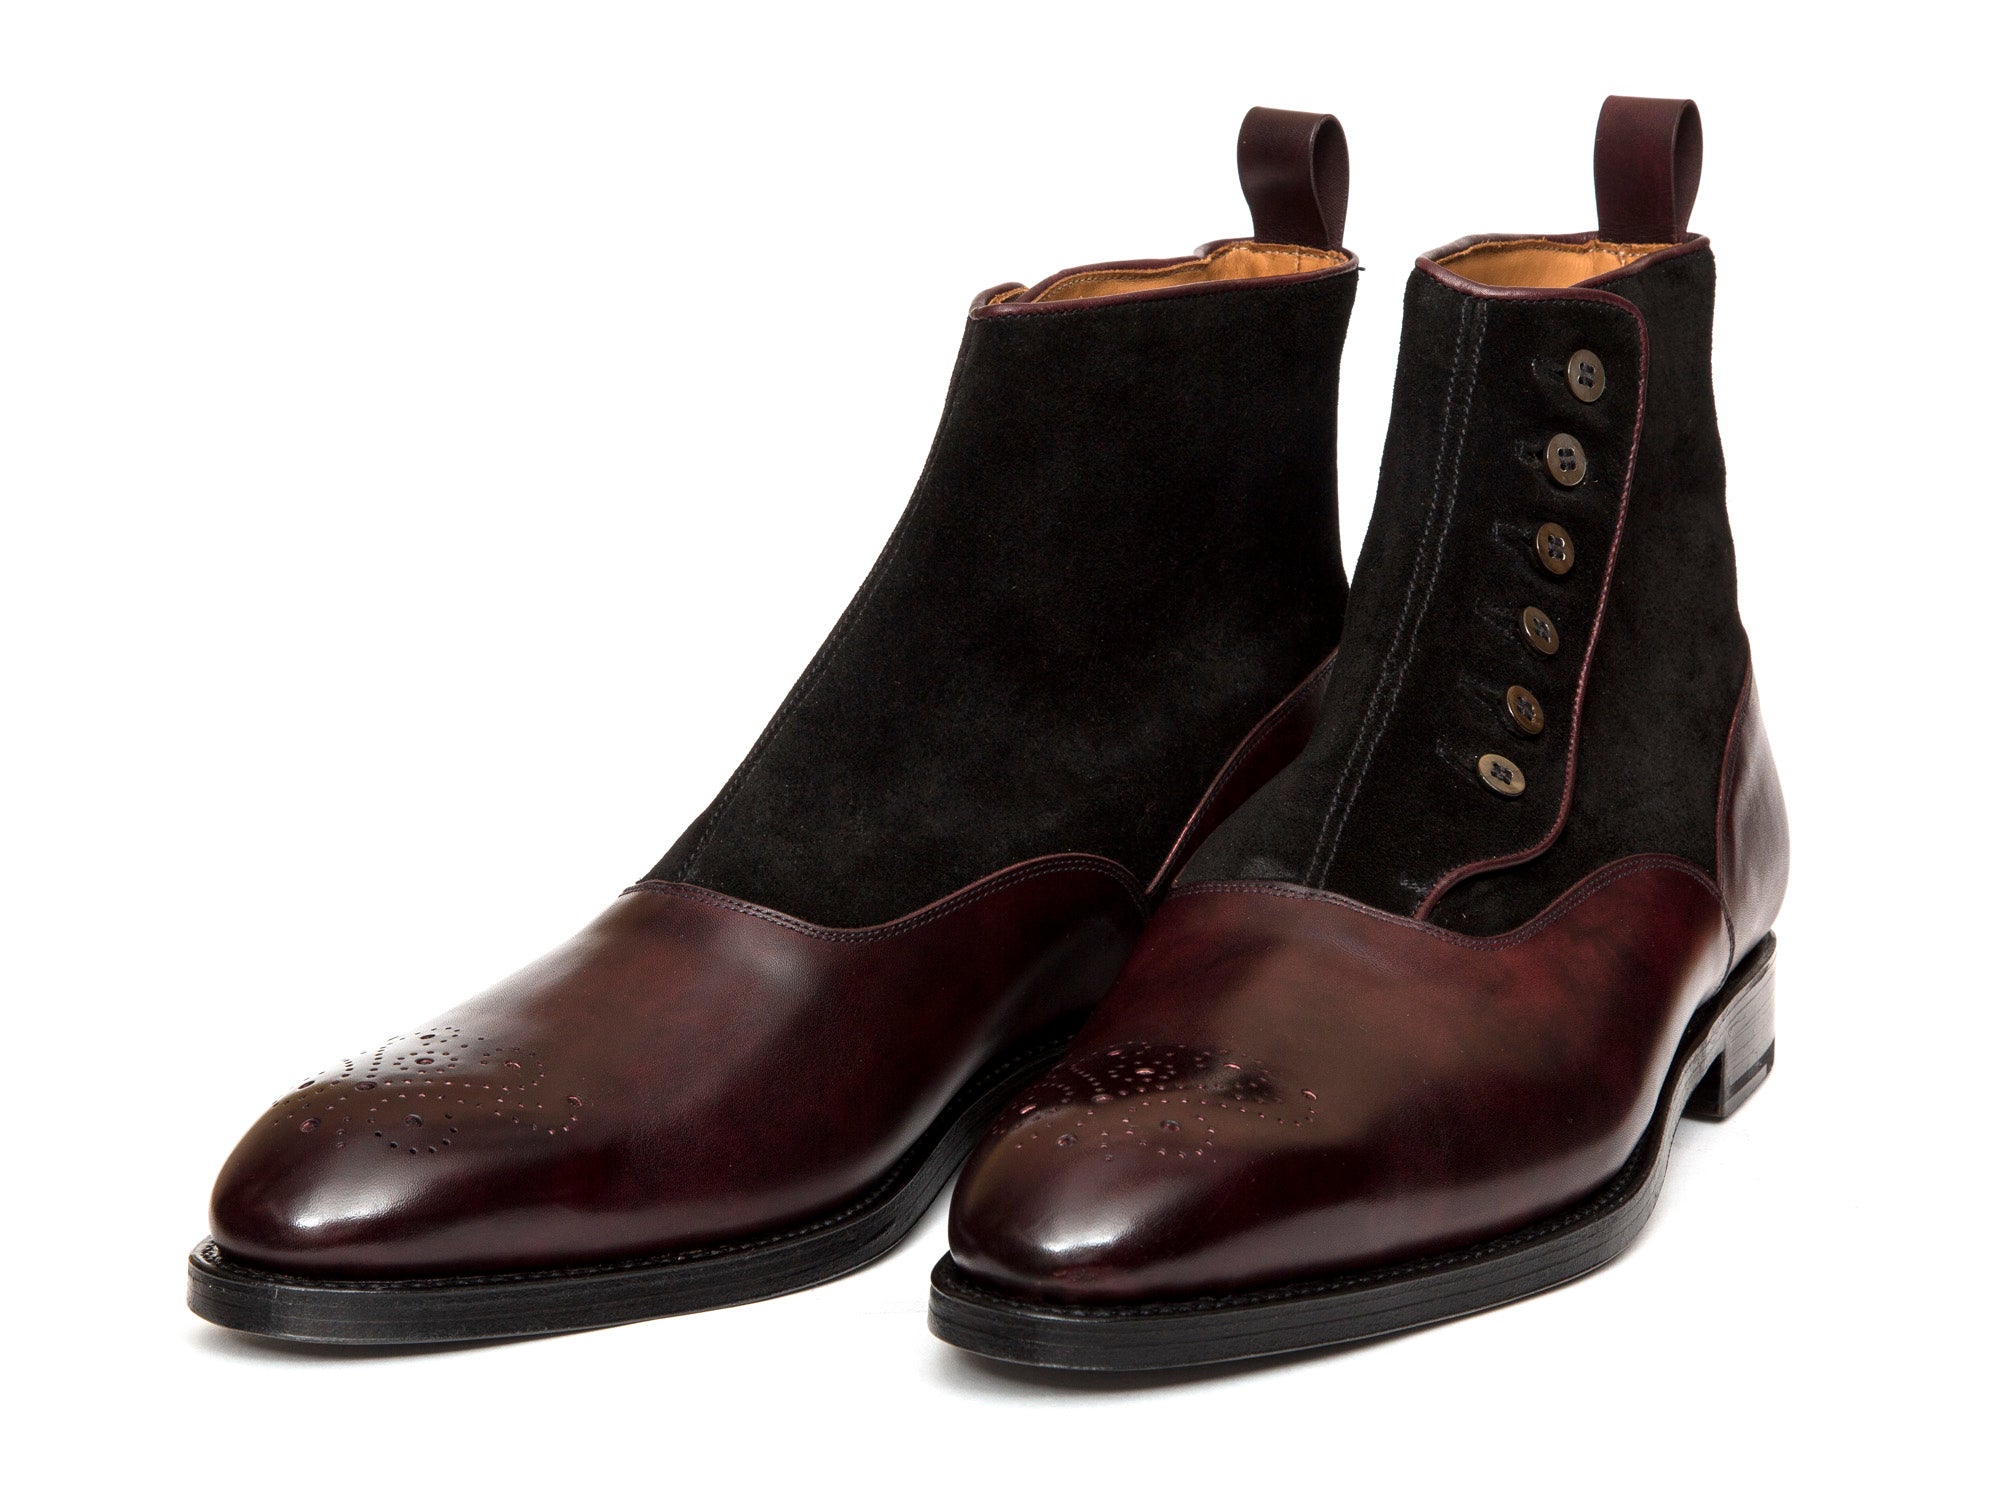 Westlake - MTO - Plum Museum Calf / Black Suede - NGT Last - Double Leather Sole